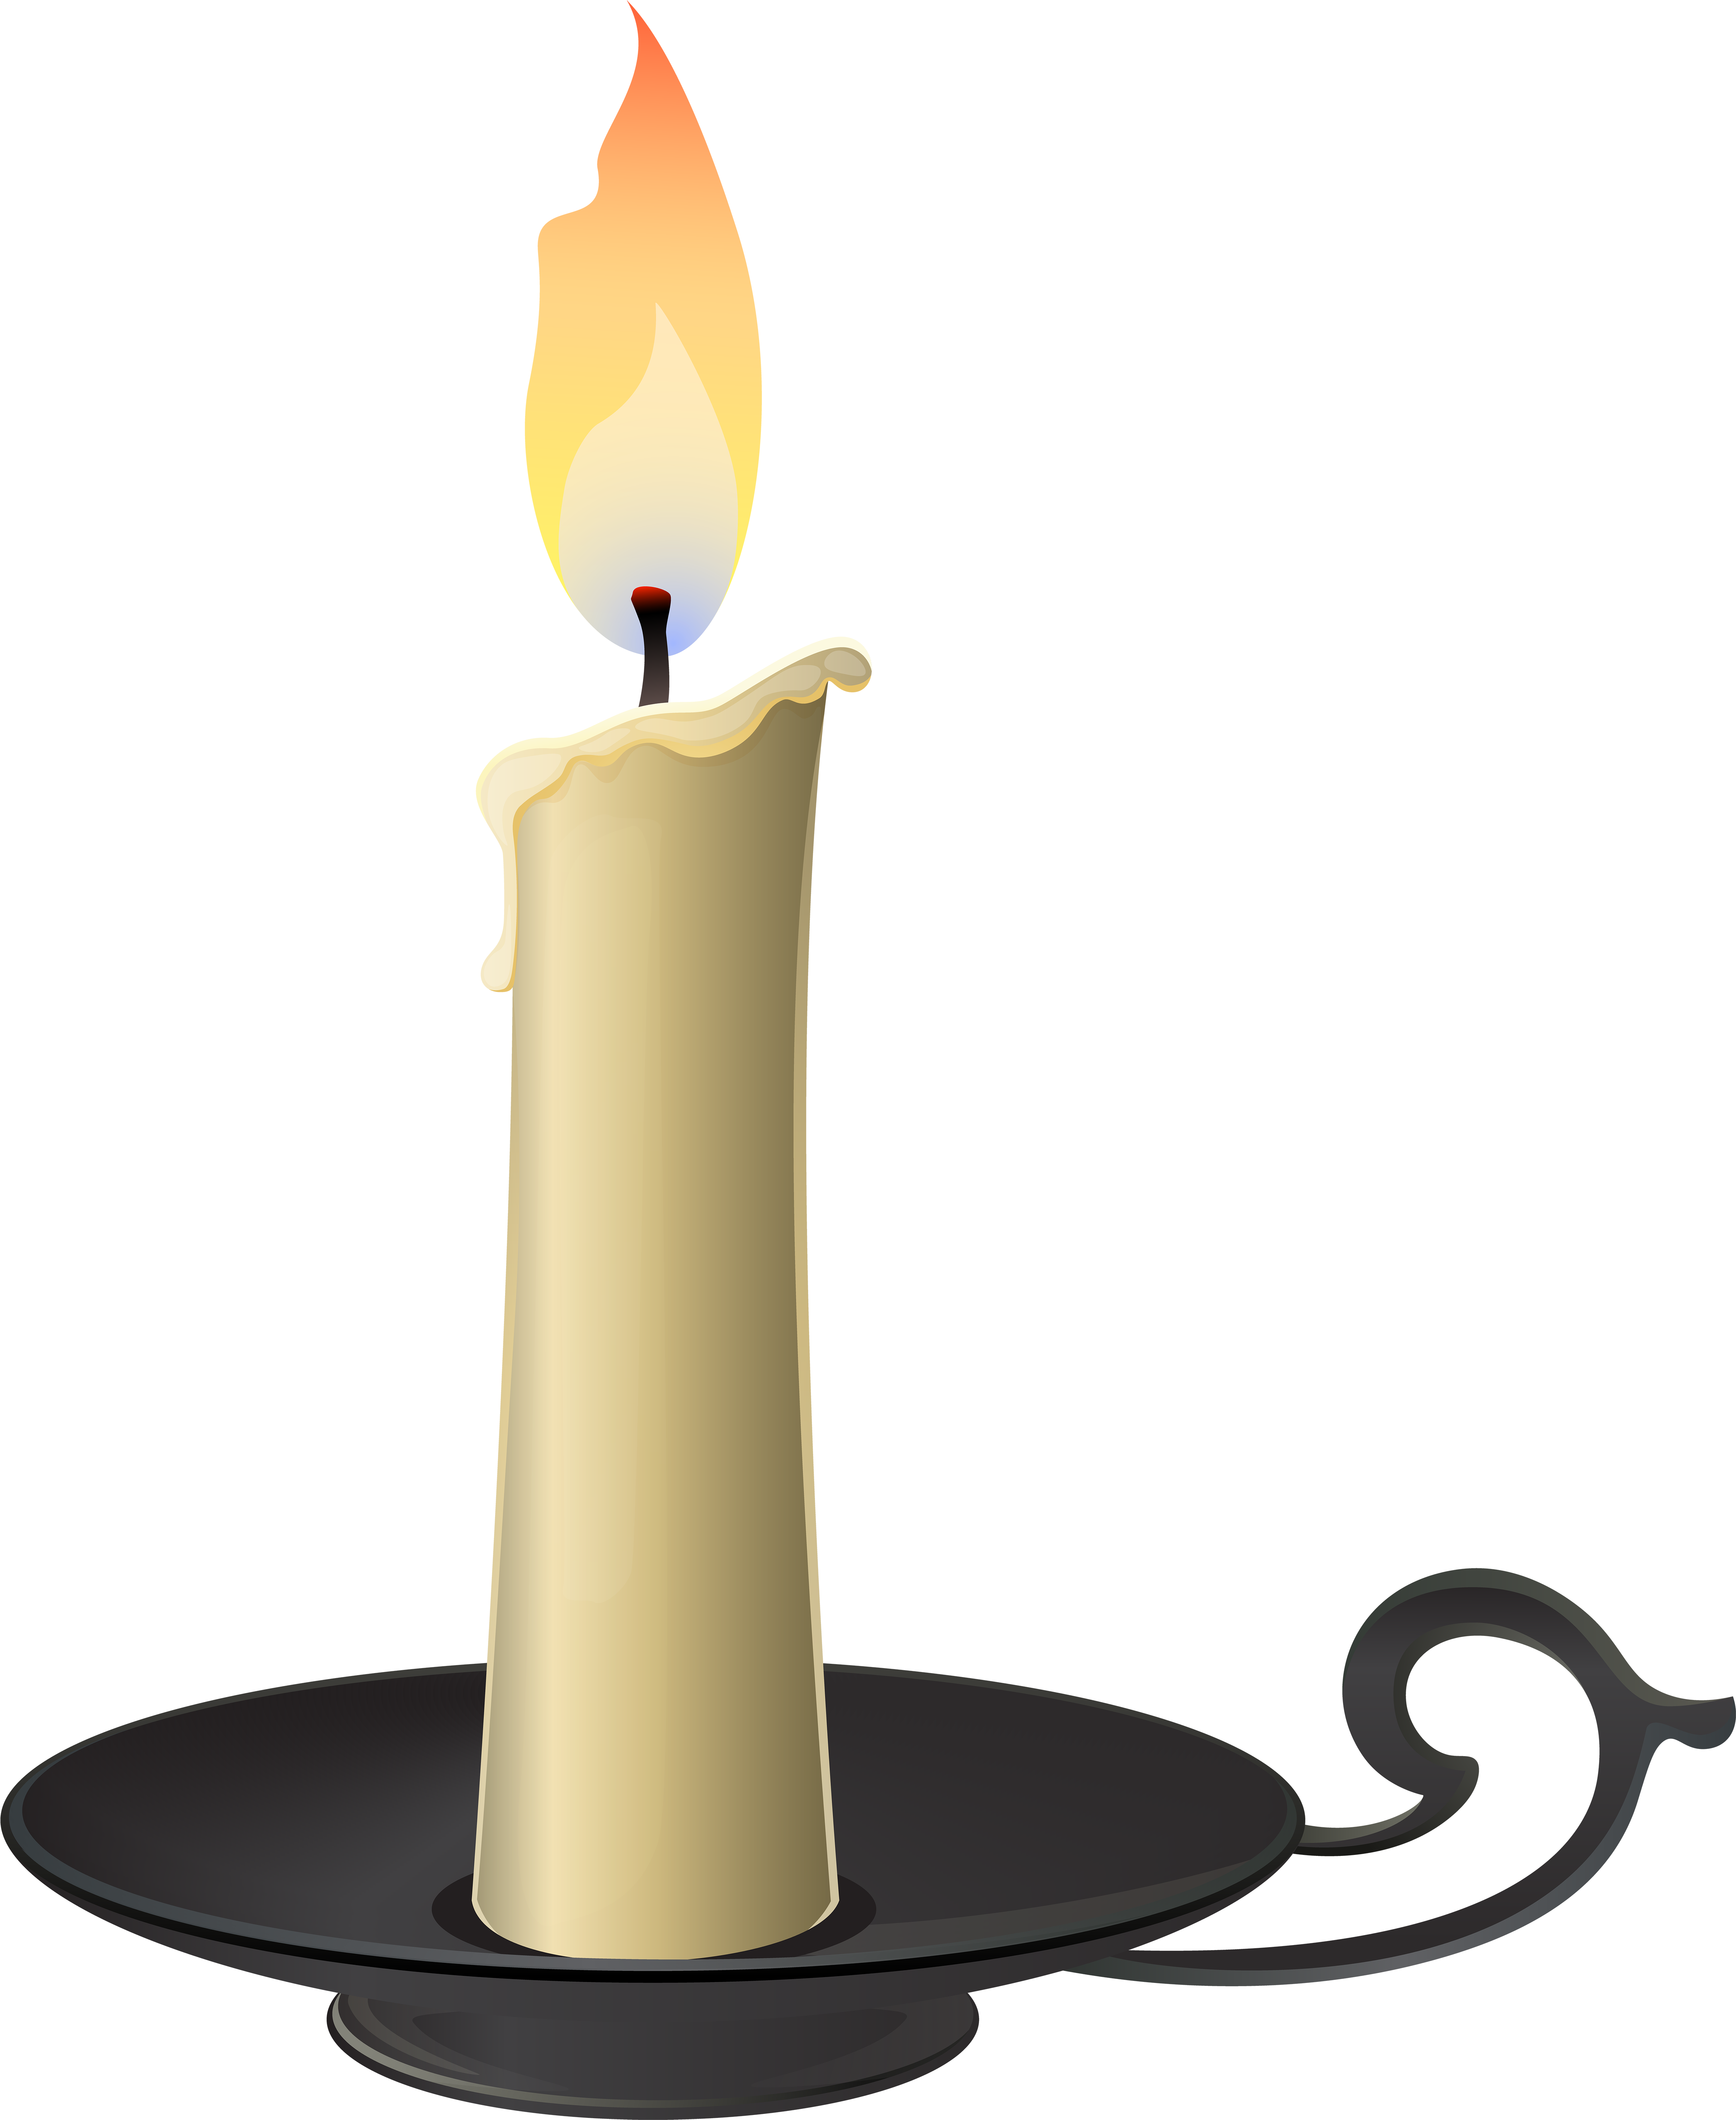 Candlestick Png Clip Art - Candle In Holder Clipart ... - Christmas Candle Clip Art Black and White